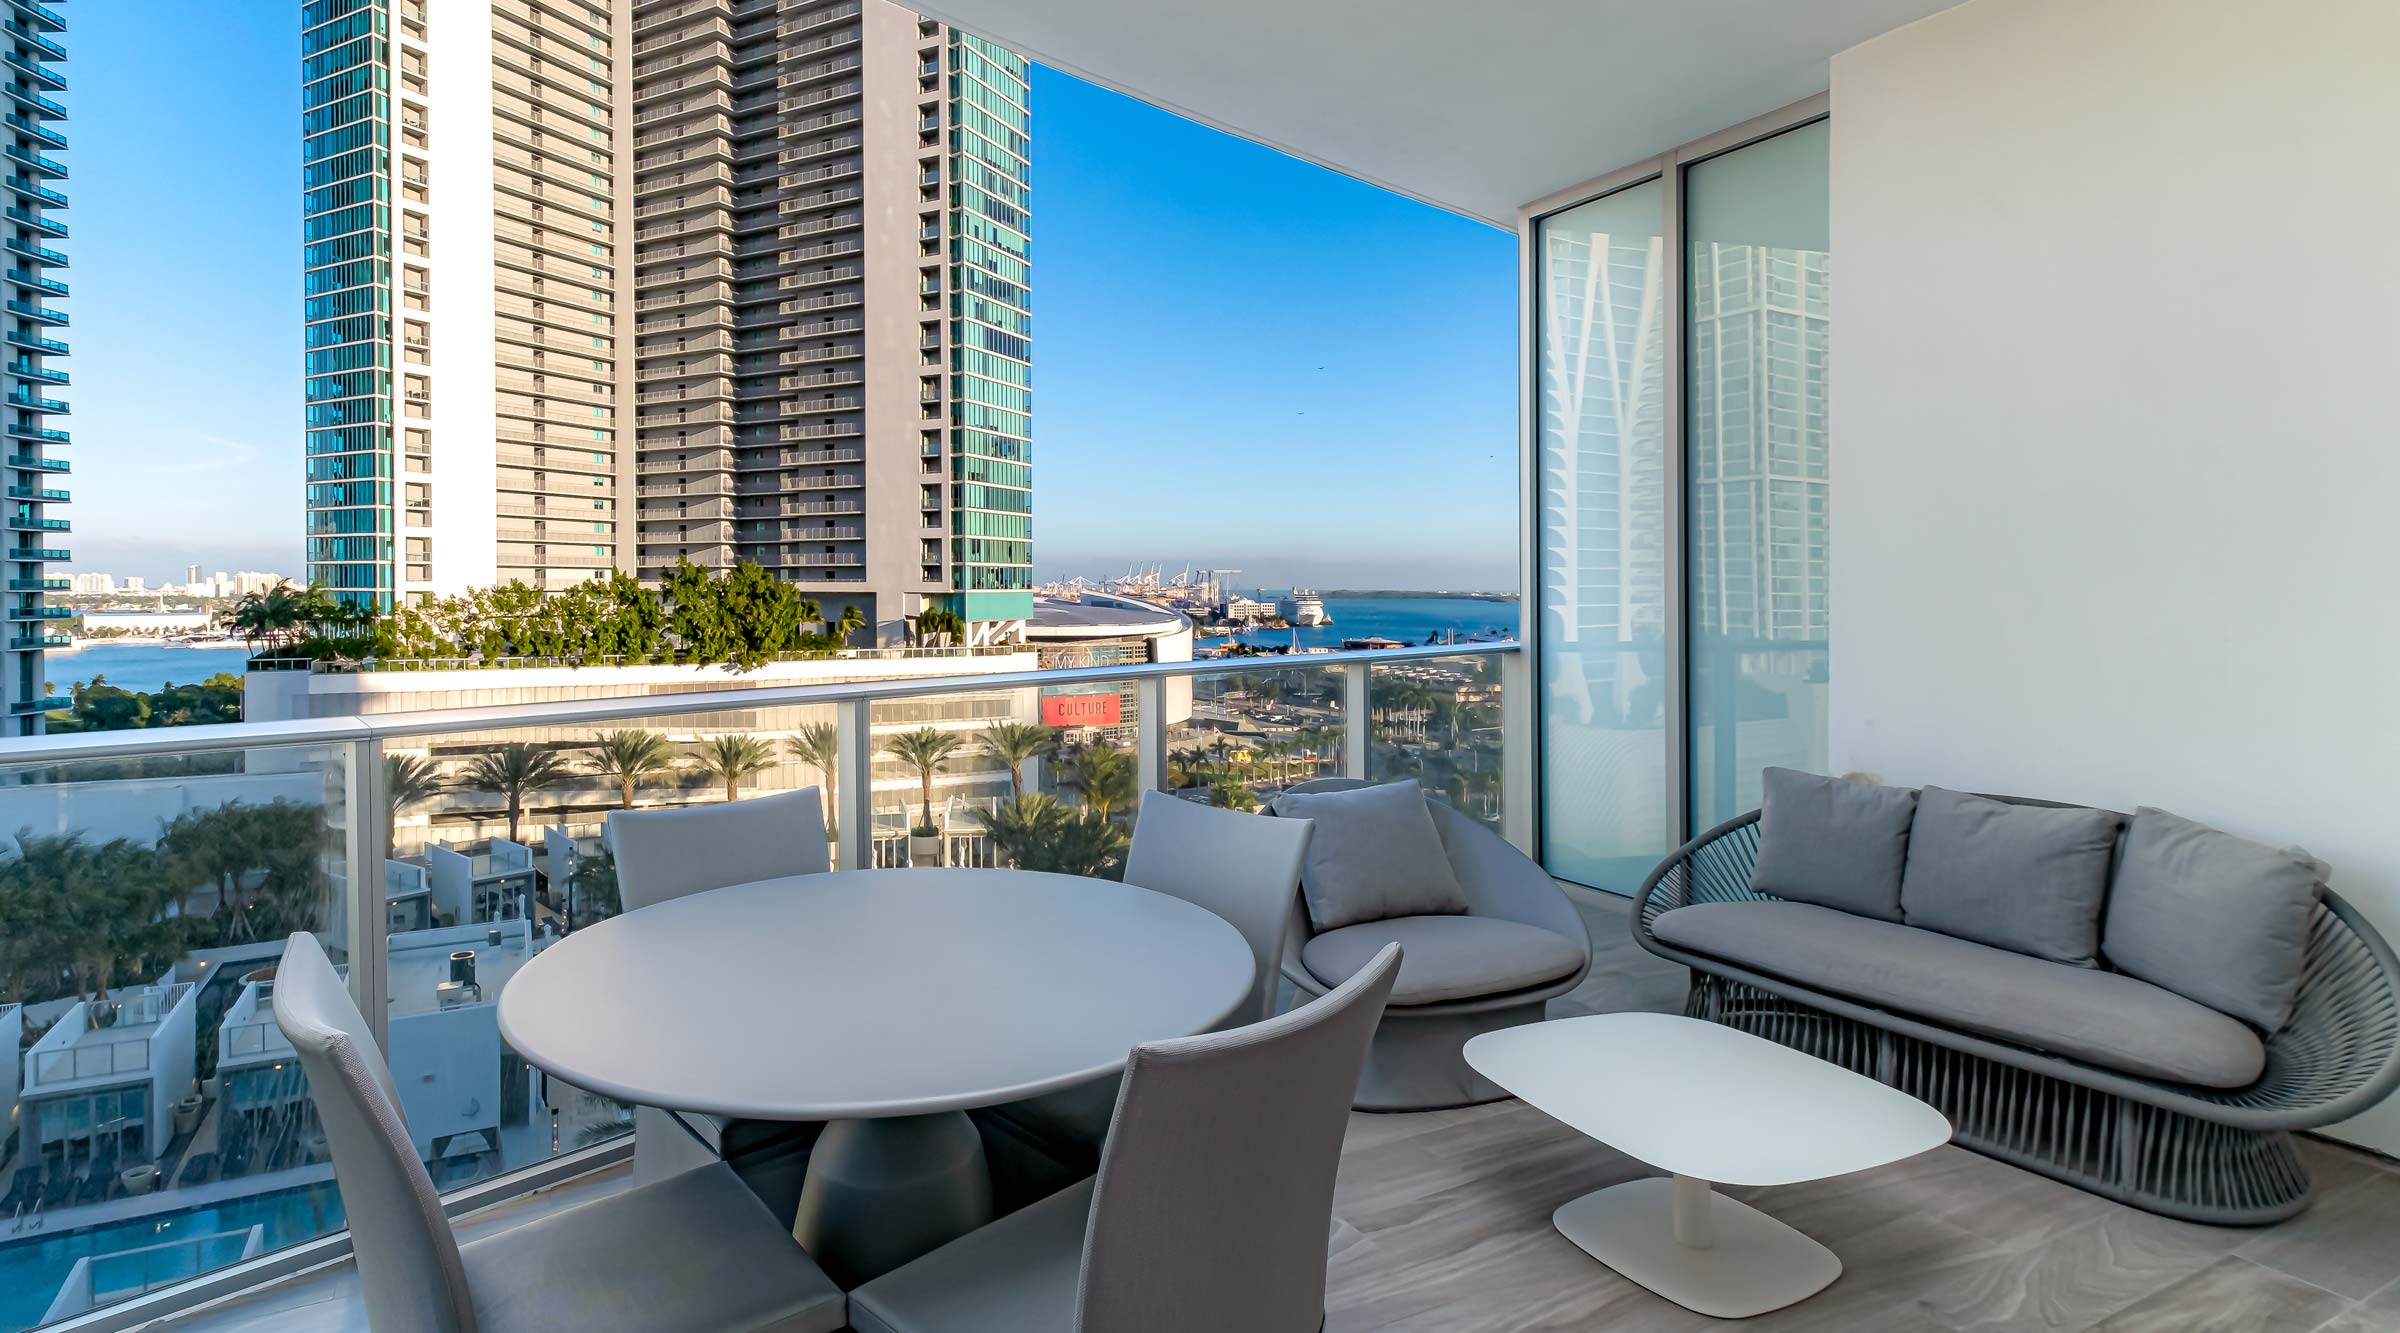  Luxury  Condos  in Heart of Downtown Paramount Miami 